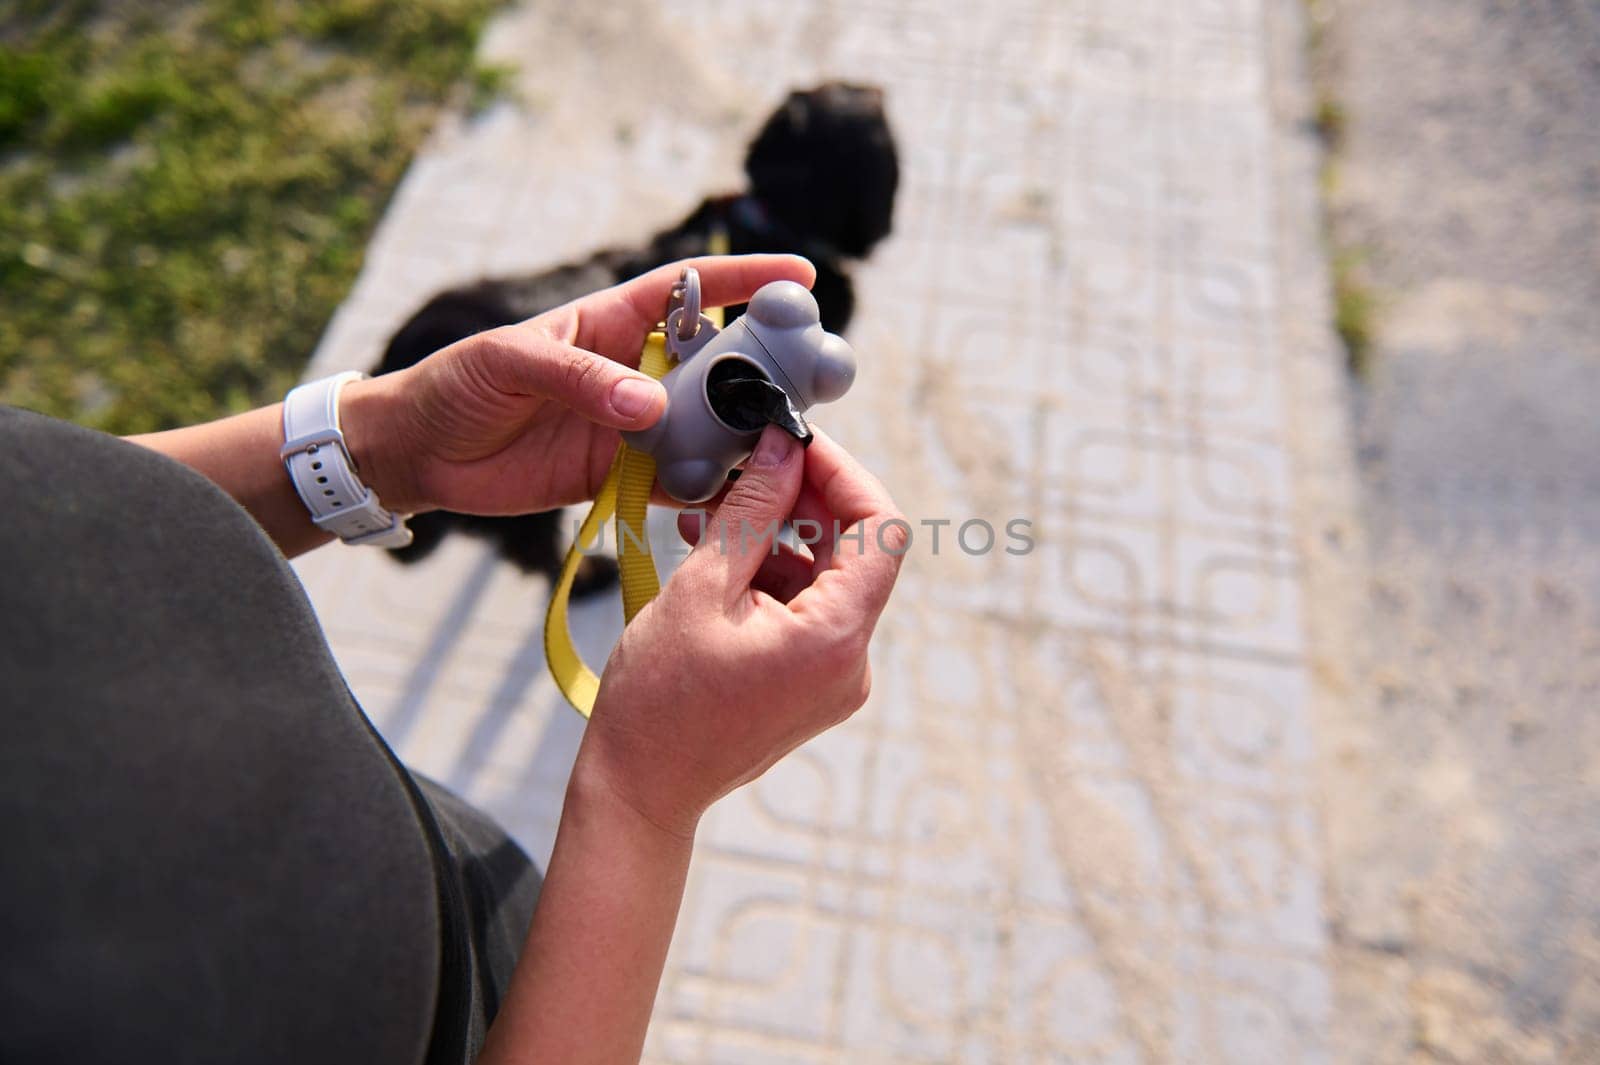 Close-up hands hold gray plastic holder for packet for cleaning pets feces, waste while walking the dog. Unrecognizable woman removing a bag from a plastic holder to pick up pets poops outdoors. by artgf